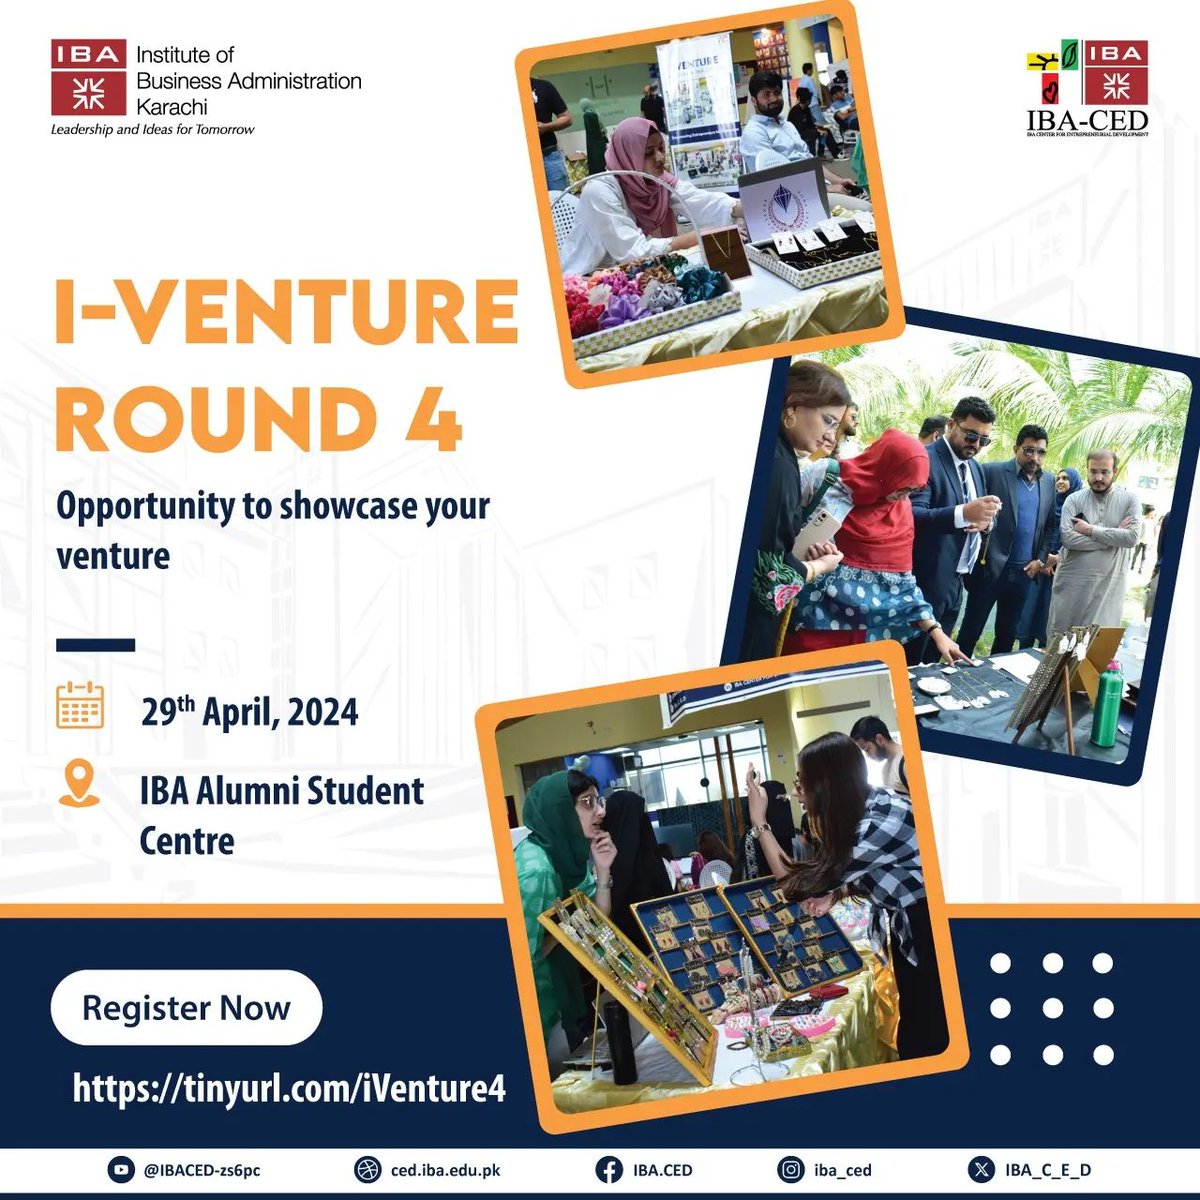 Opportunity Alert : I-VENTURE Round 4! Calling all IBA students with groundbreaking ideas and startups. This is your moment to shine! Present your innovations, gain valuable insights, and connect with like-minded individuals. 1/2